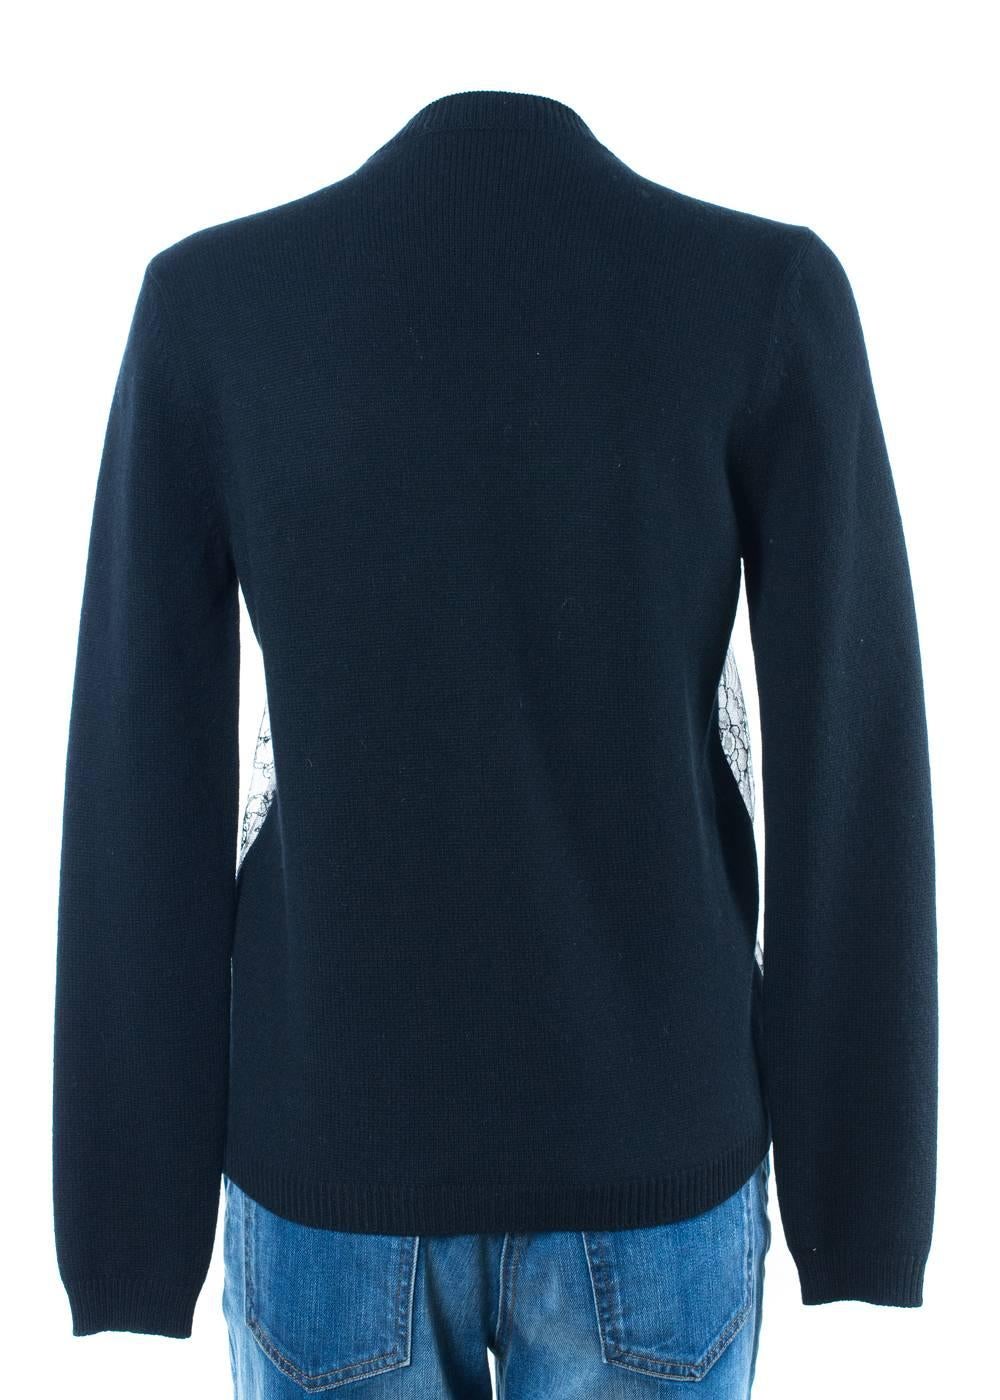 Valentino Women's Black Broadtail Embellished Wool Sweater In New Condition For Sale In Brooklyn, NY